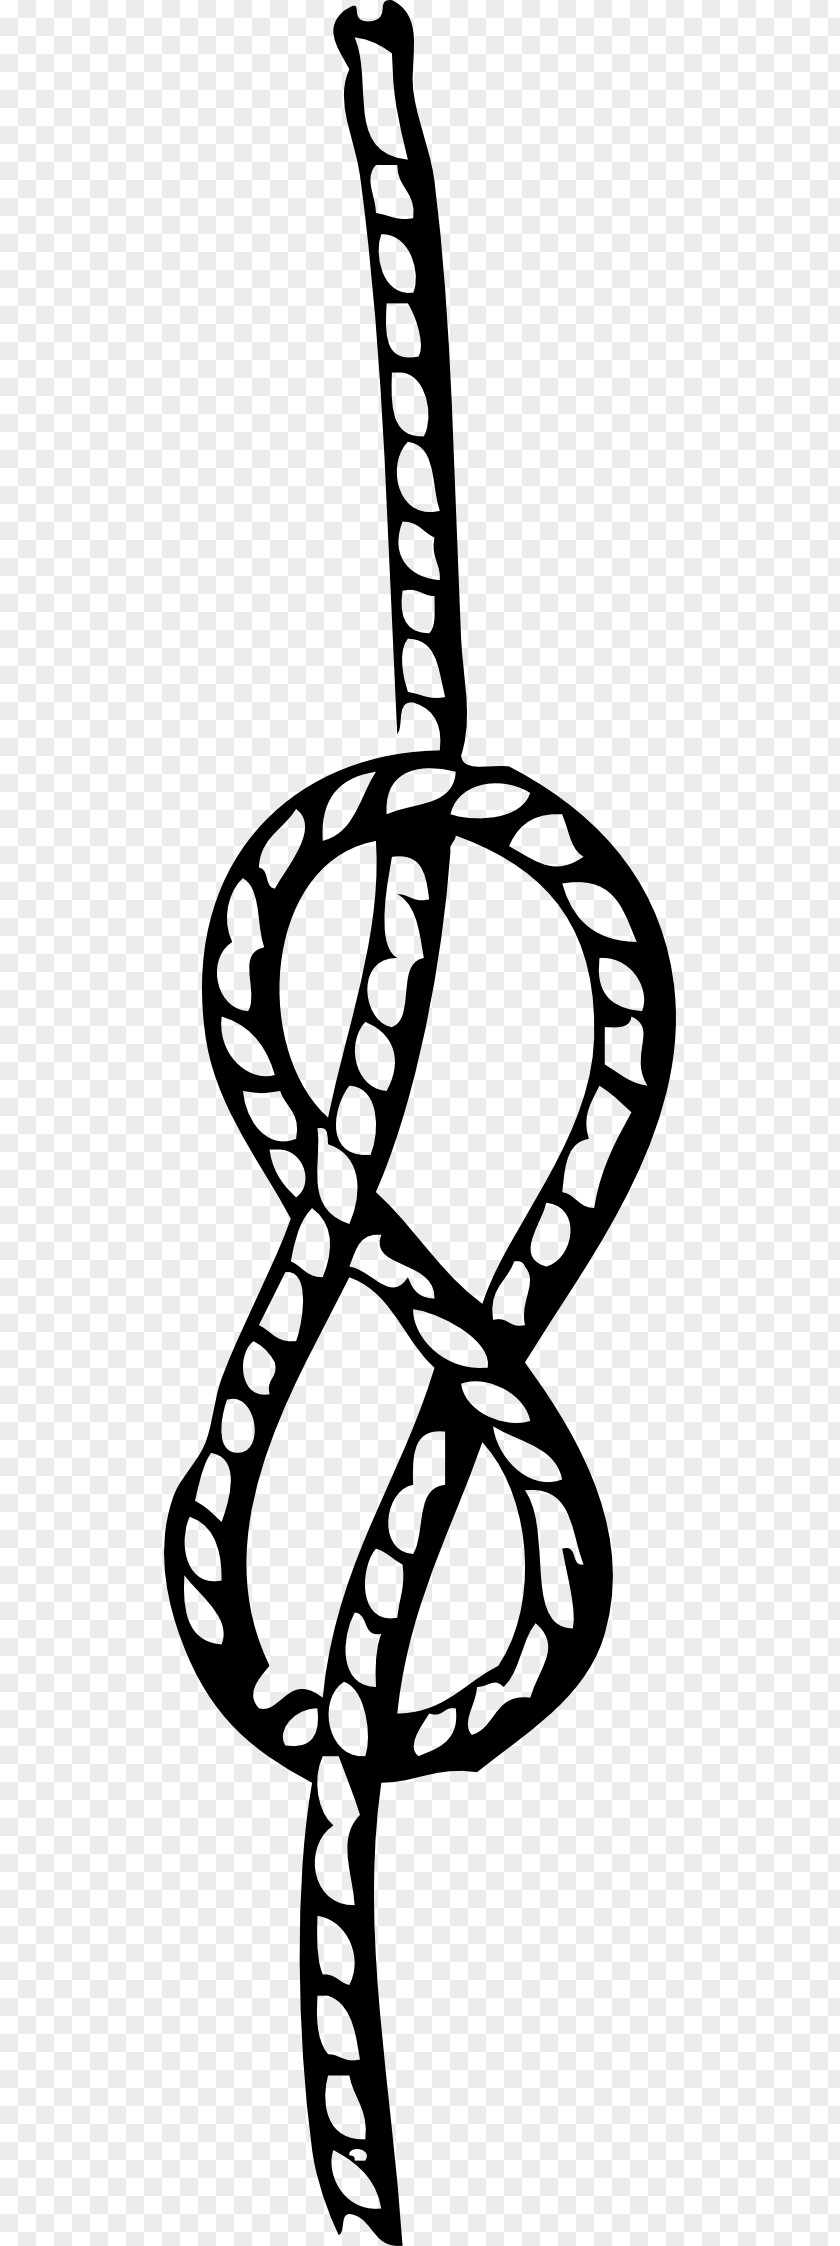 Anchor Knot Rope Clip Art PNG